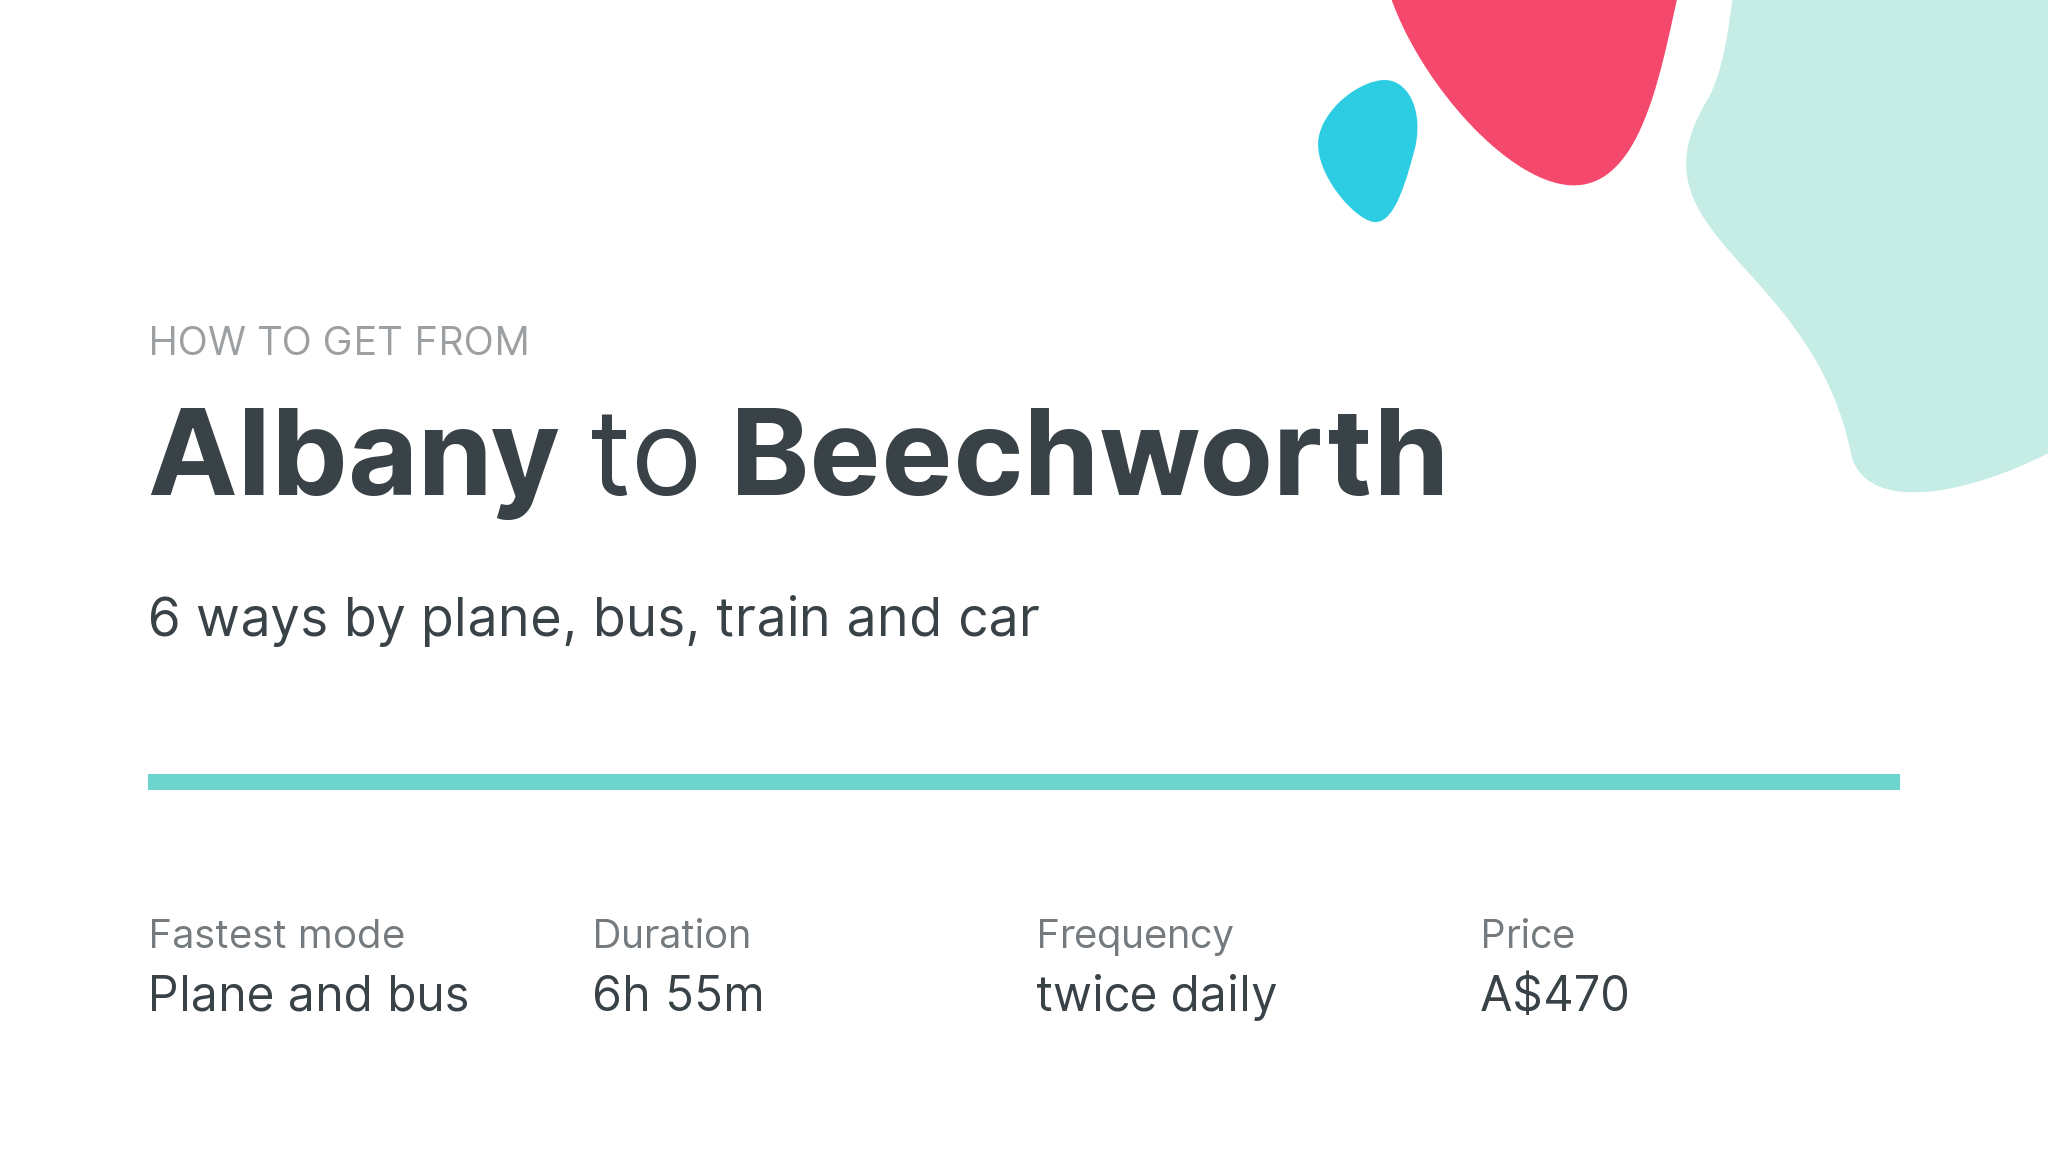 How do I get from Albany to Beechworth